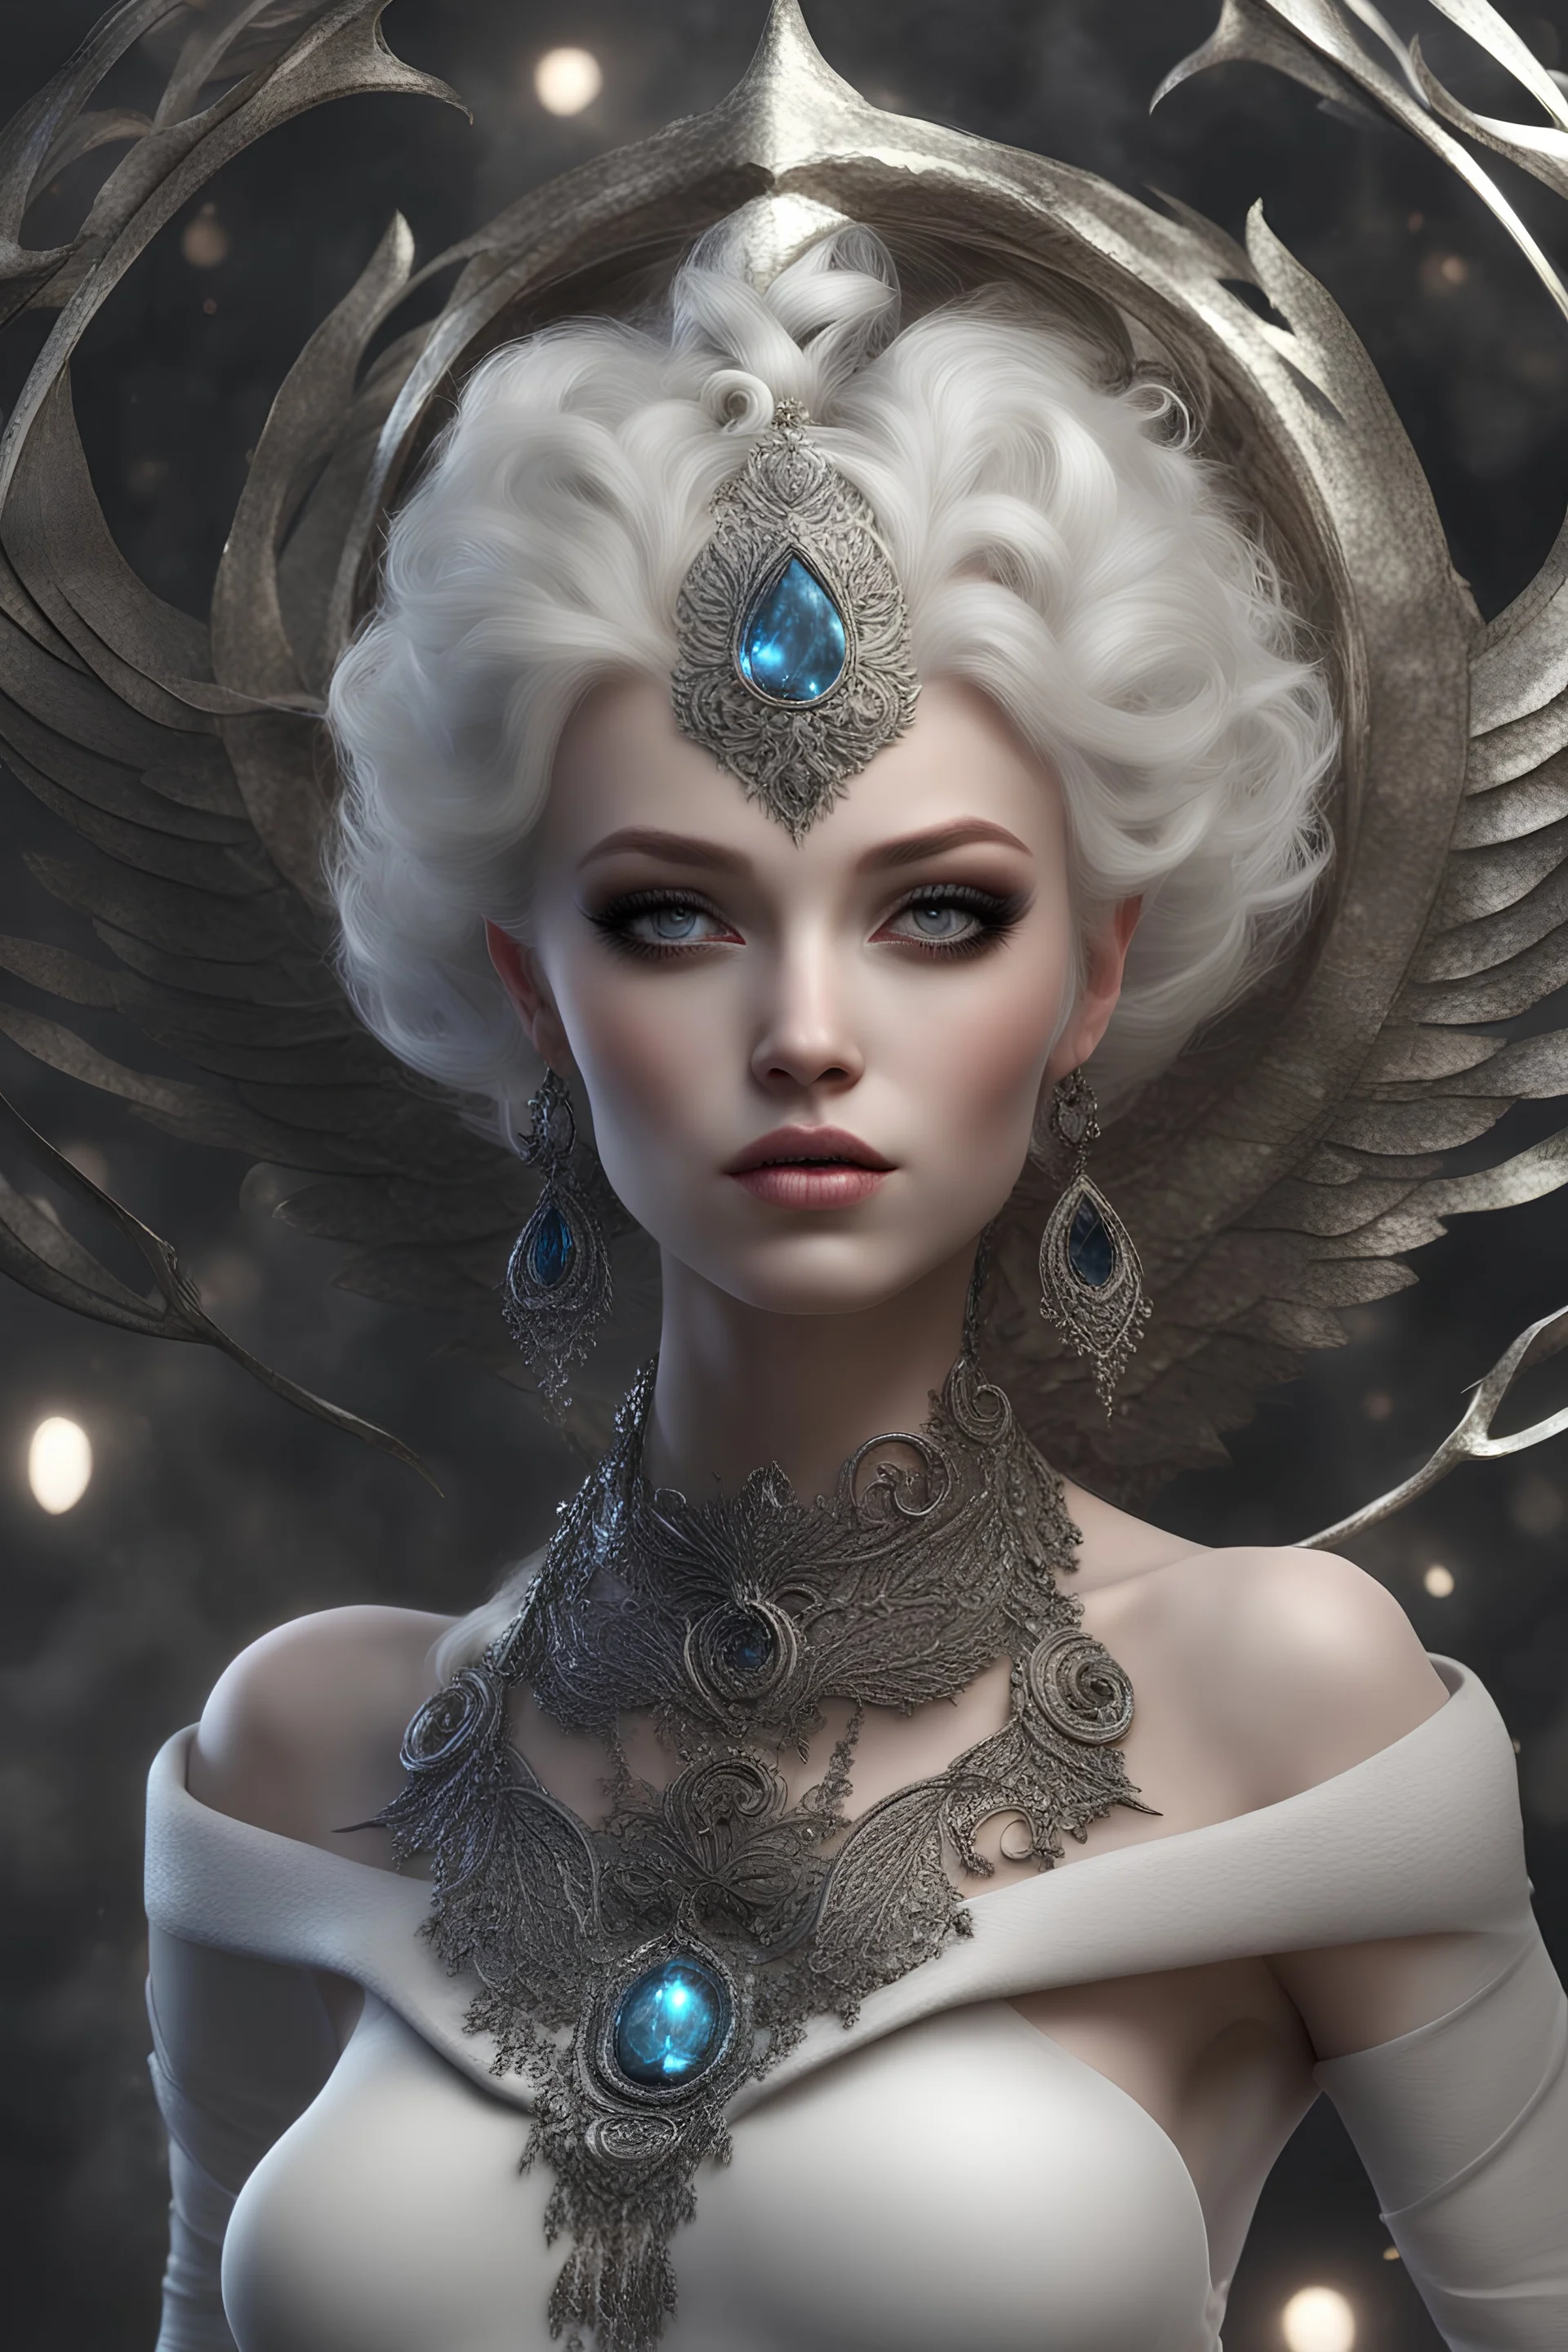 An amazing creature, incredibly cute appearance with a hellishly evil soul, in the style of good and evil, demonangel mythiccore, white mysticcraft, luminosity of background, fallingcore, hyper realistic and hyper detailed, stunning composition, hyper emotional, epic cinematic lighting, 32k UHD resolution, made by daz3d, DamShelma